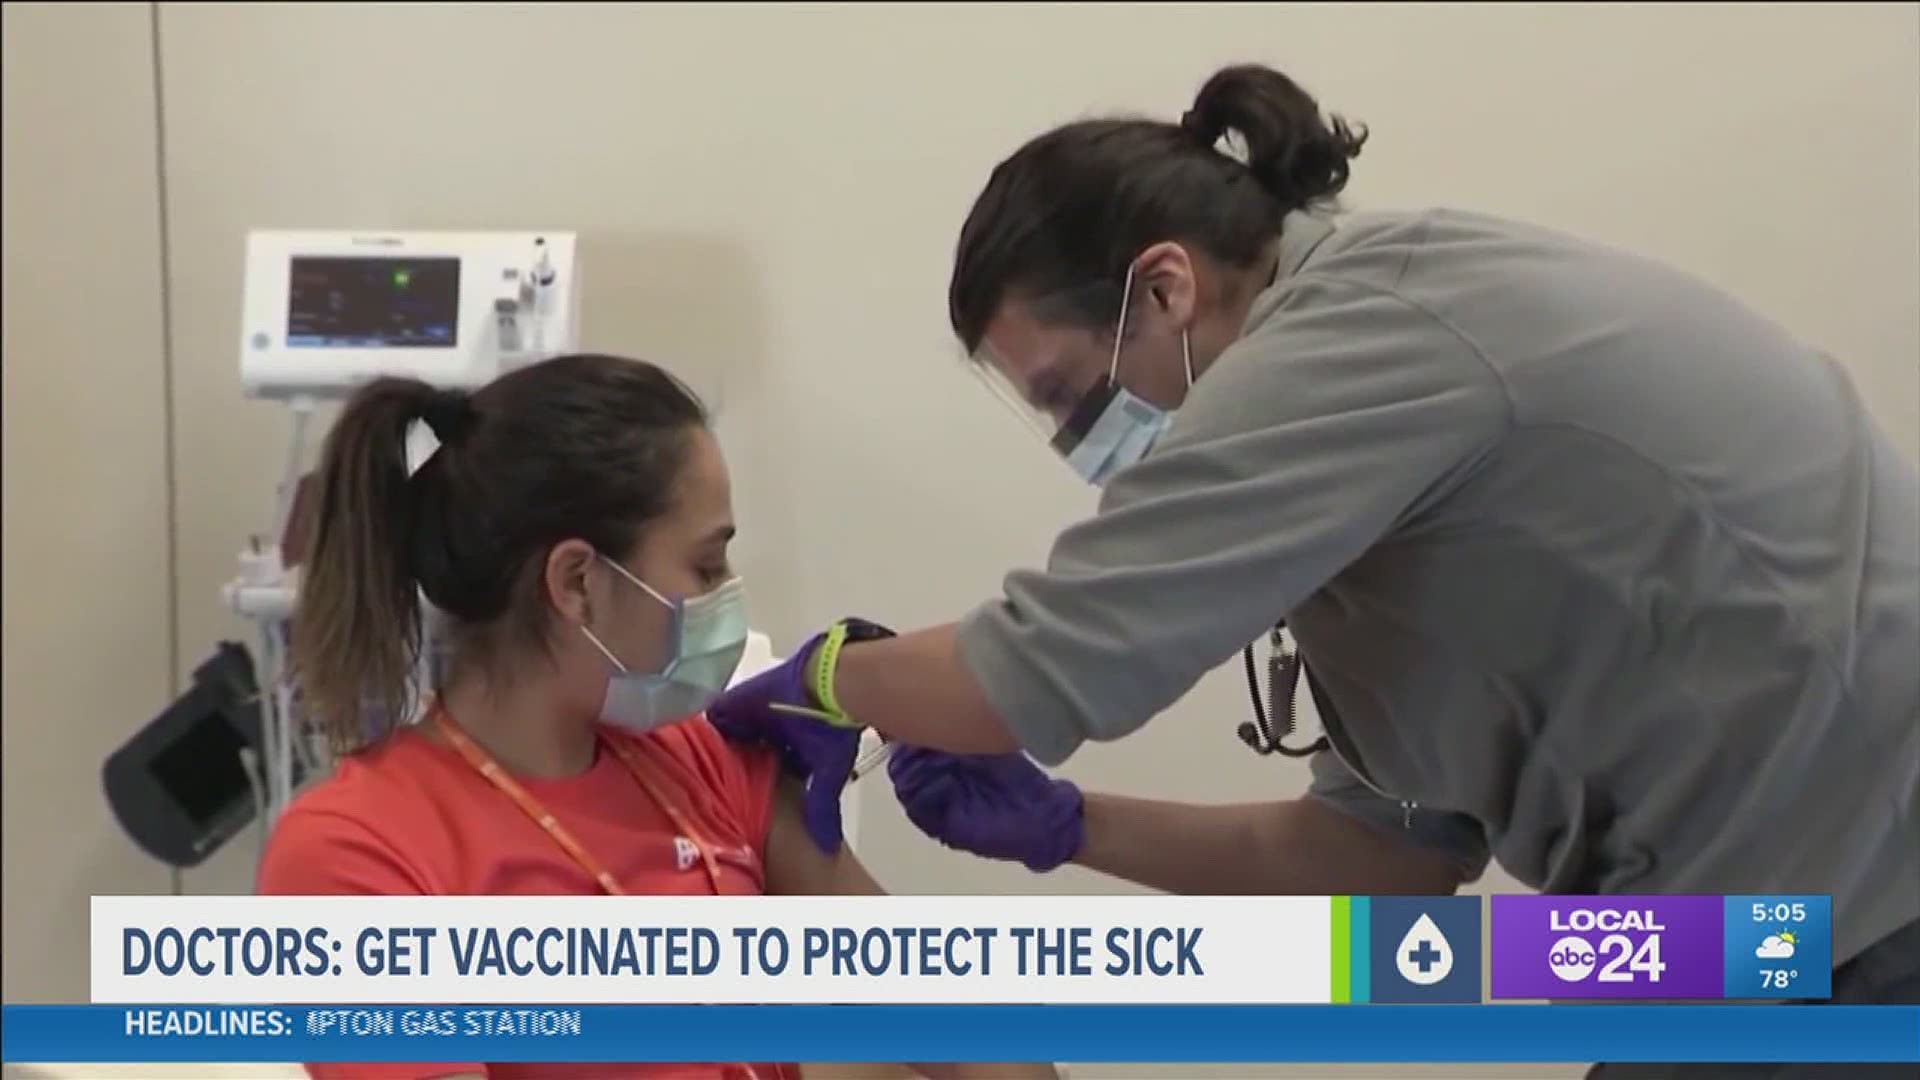 “We’ve got to protect those people who can’t get a good response to the vaccine,” said Dr. Stephen Threlkeld, Baptist Memorial Hospital.